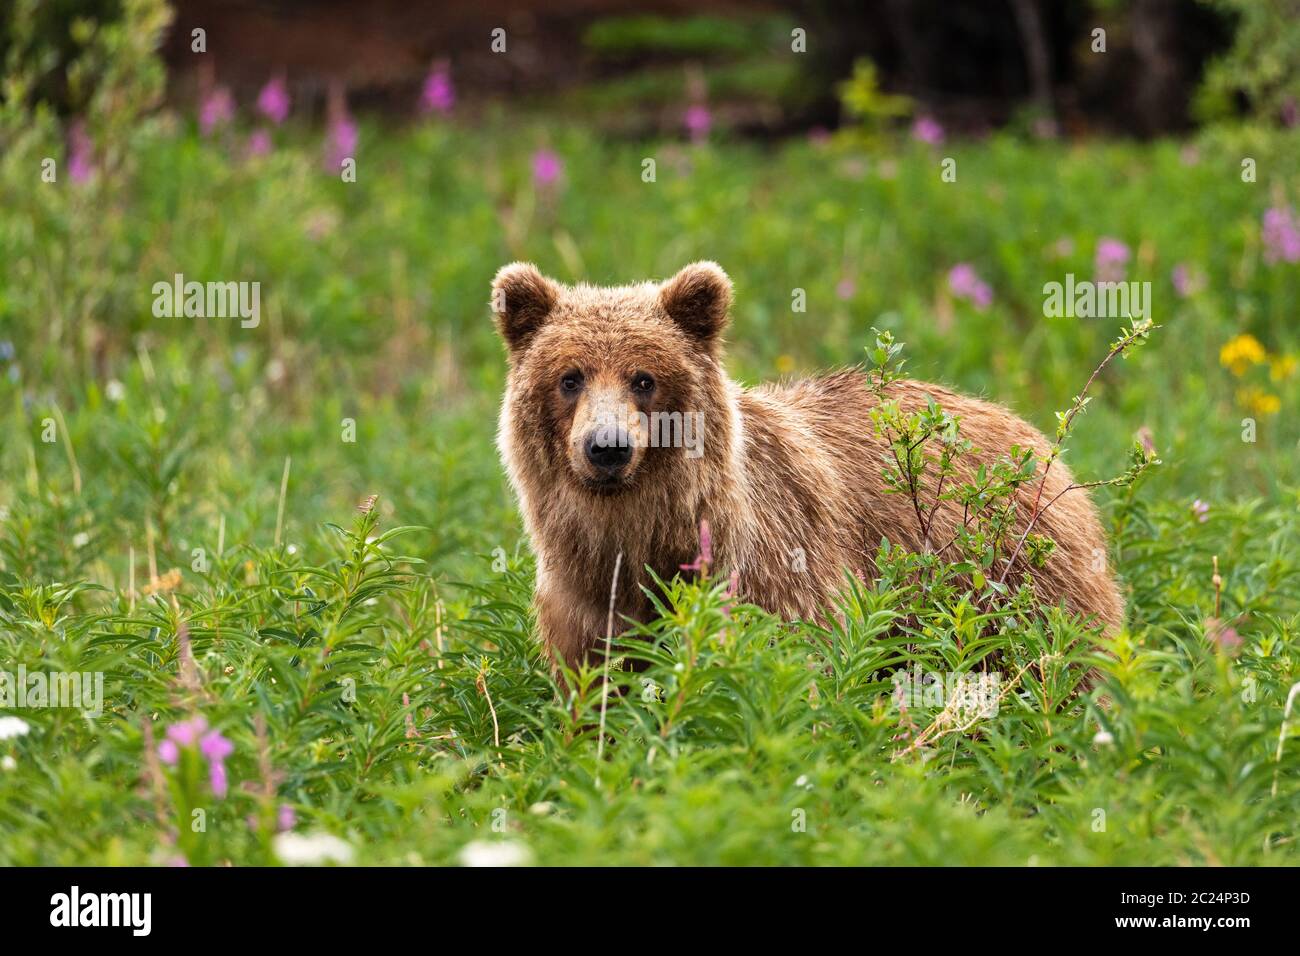 A Grizzly Bear on a Meadow Stock Photo